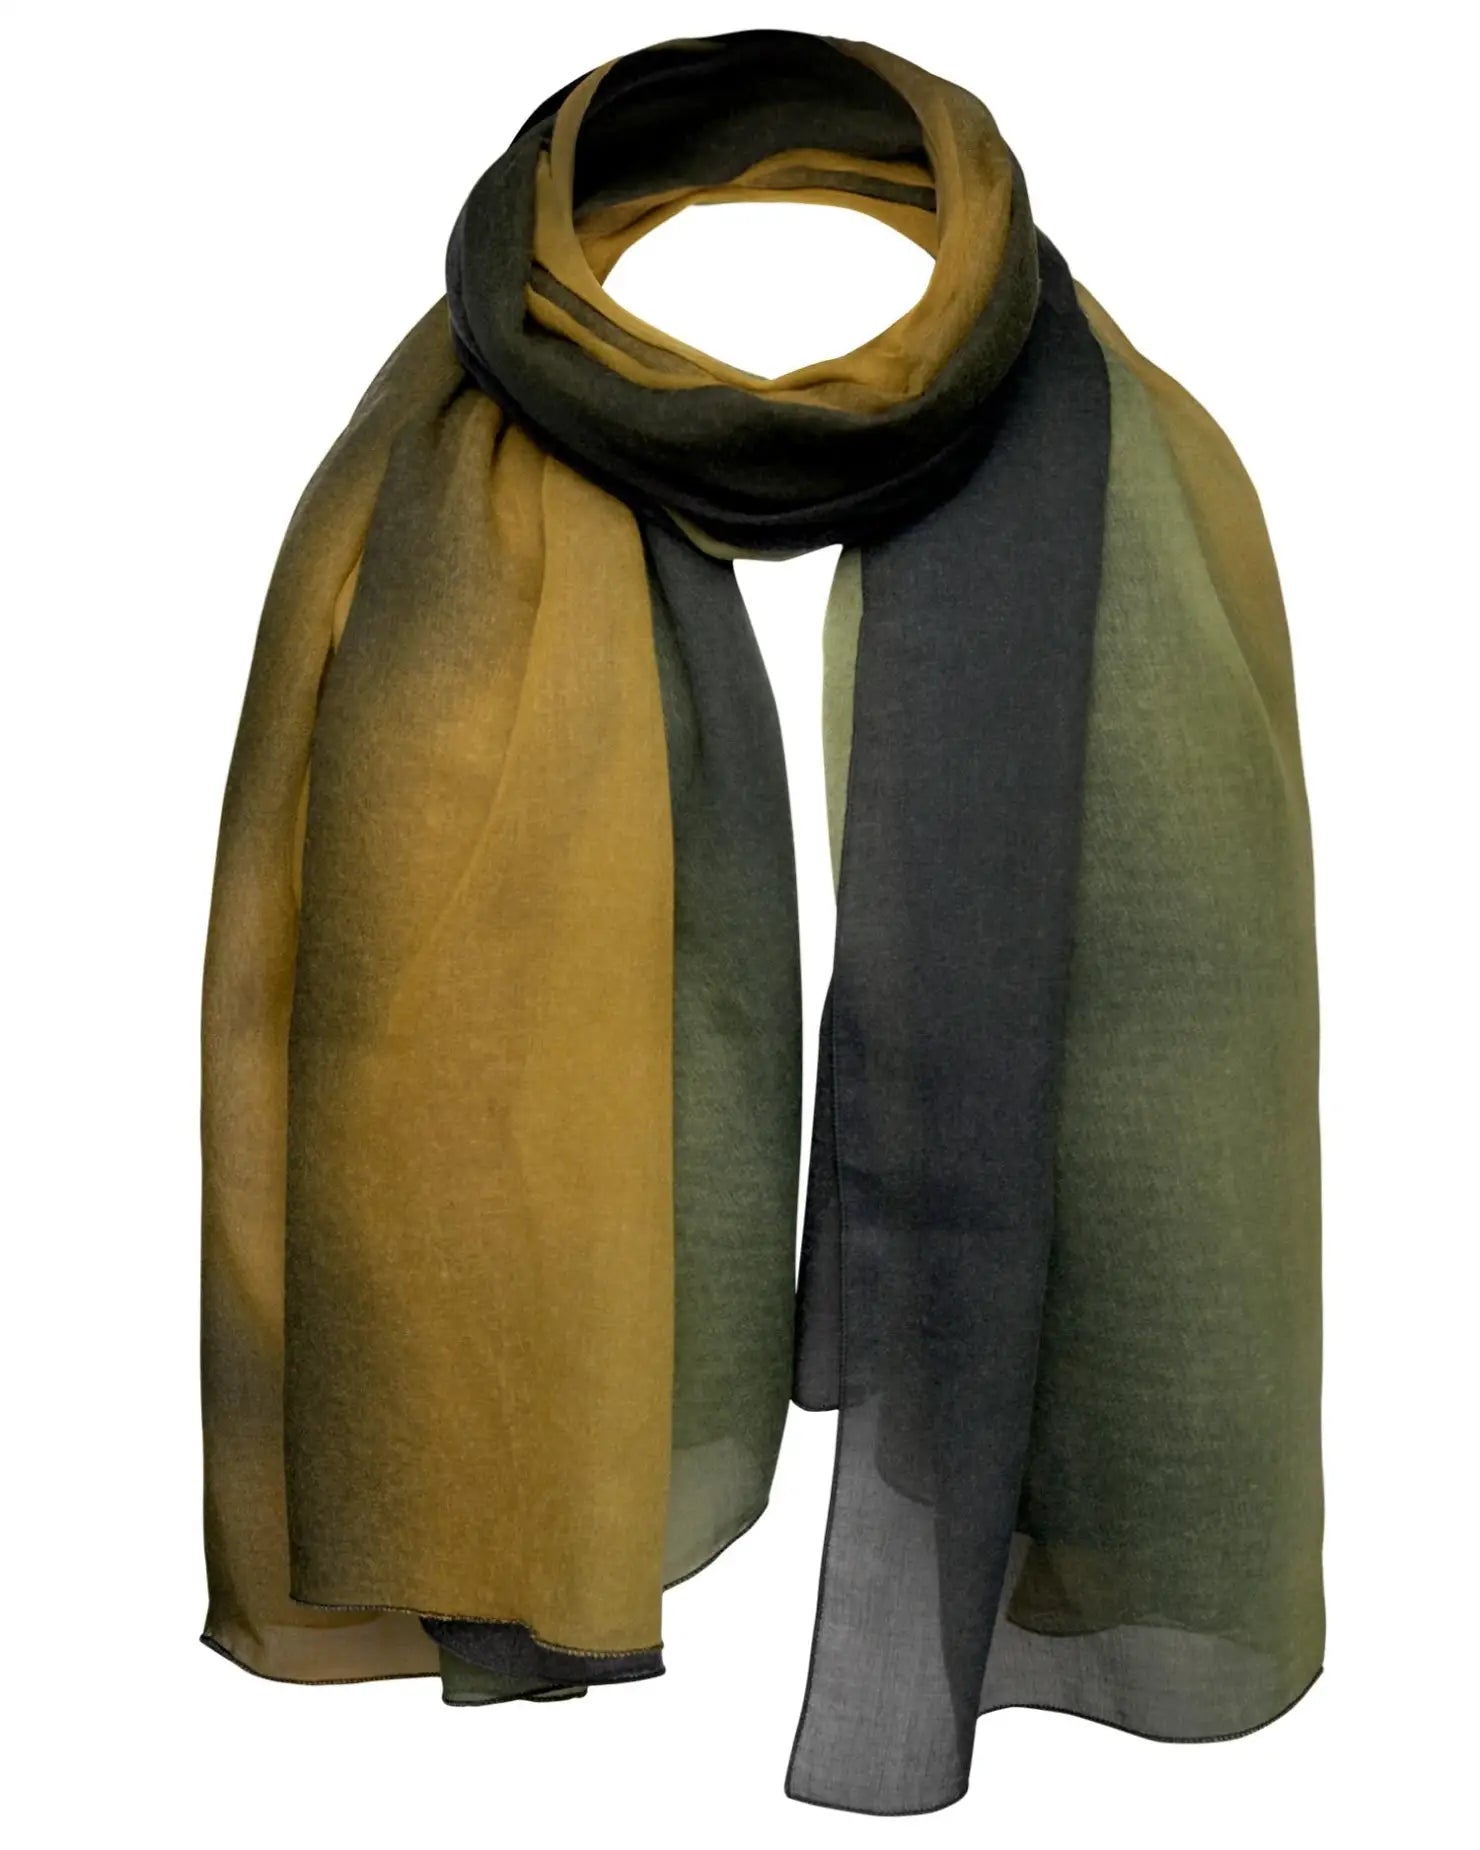 Green and black ombre tie dye scarf displayed.